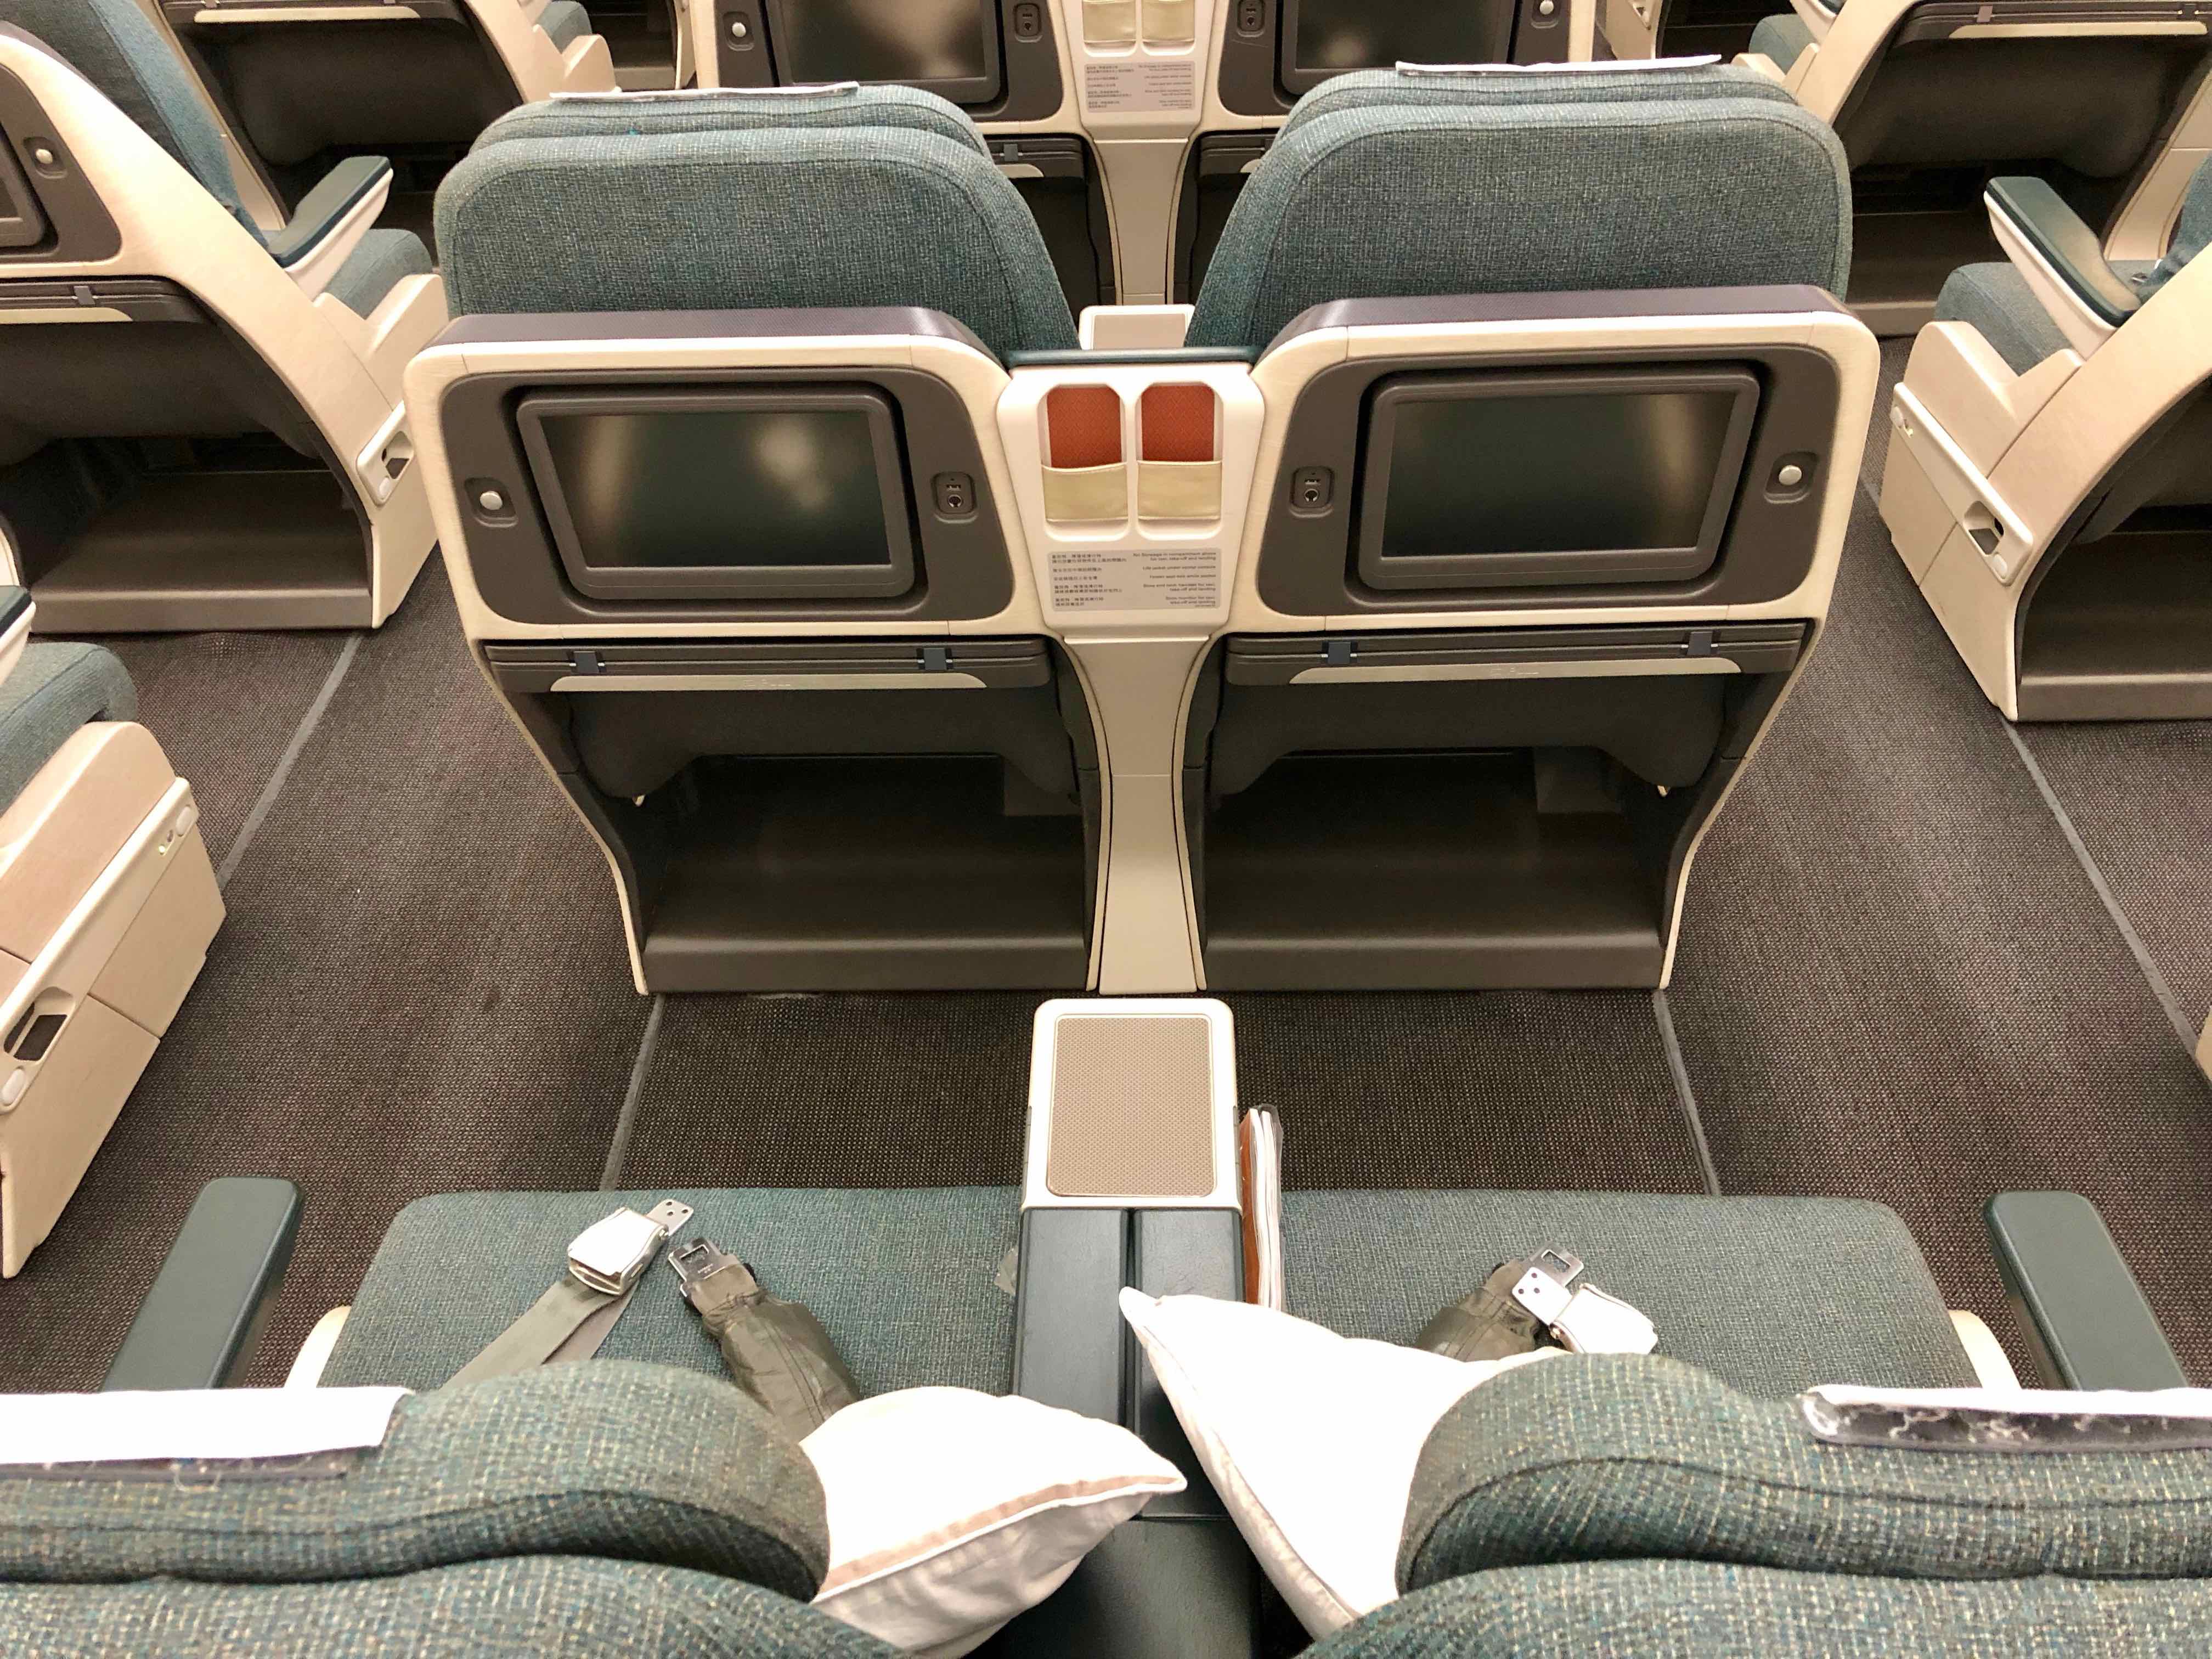 Cathay Dragon A330 Business Class overview | Point Hacks